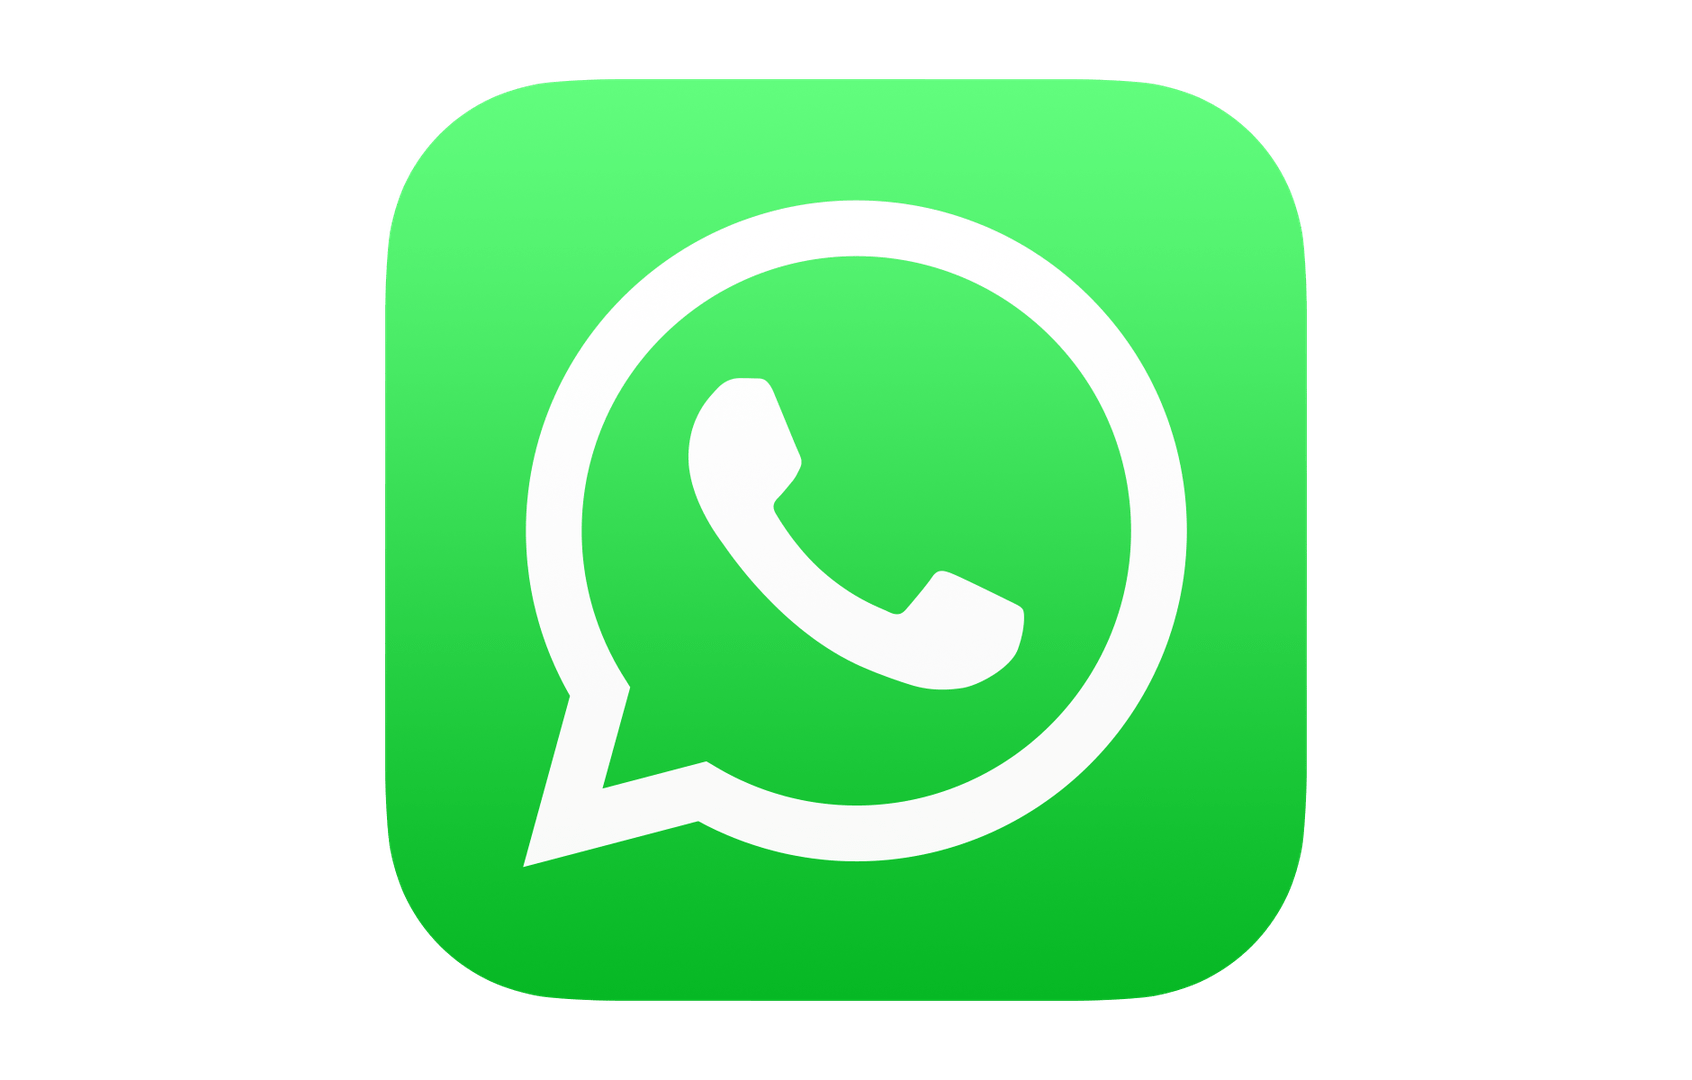 Whatsapp Web - Message Forwarding Limits, End-To-End Encrypted